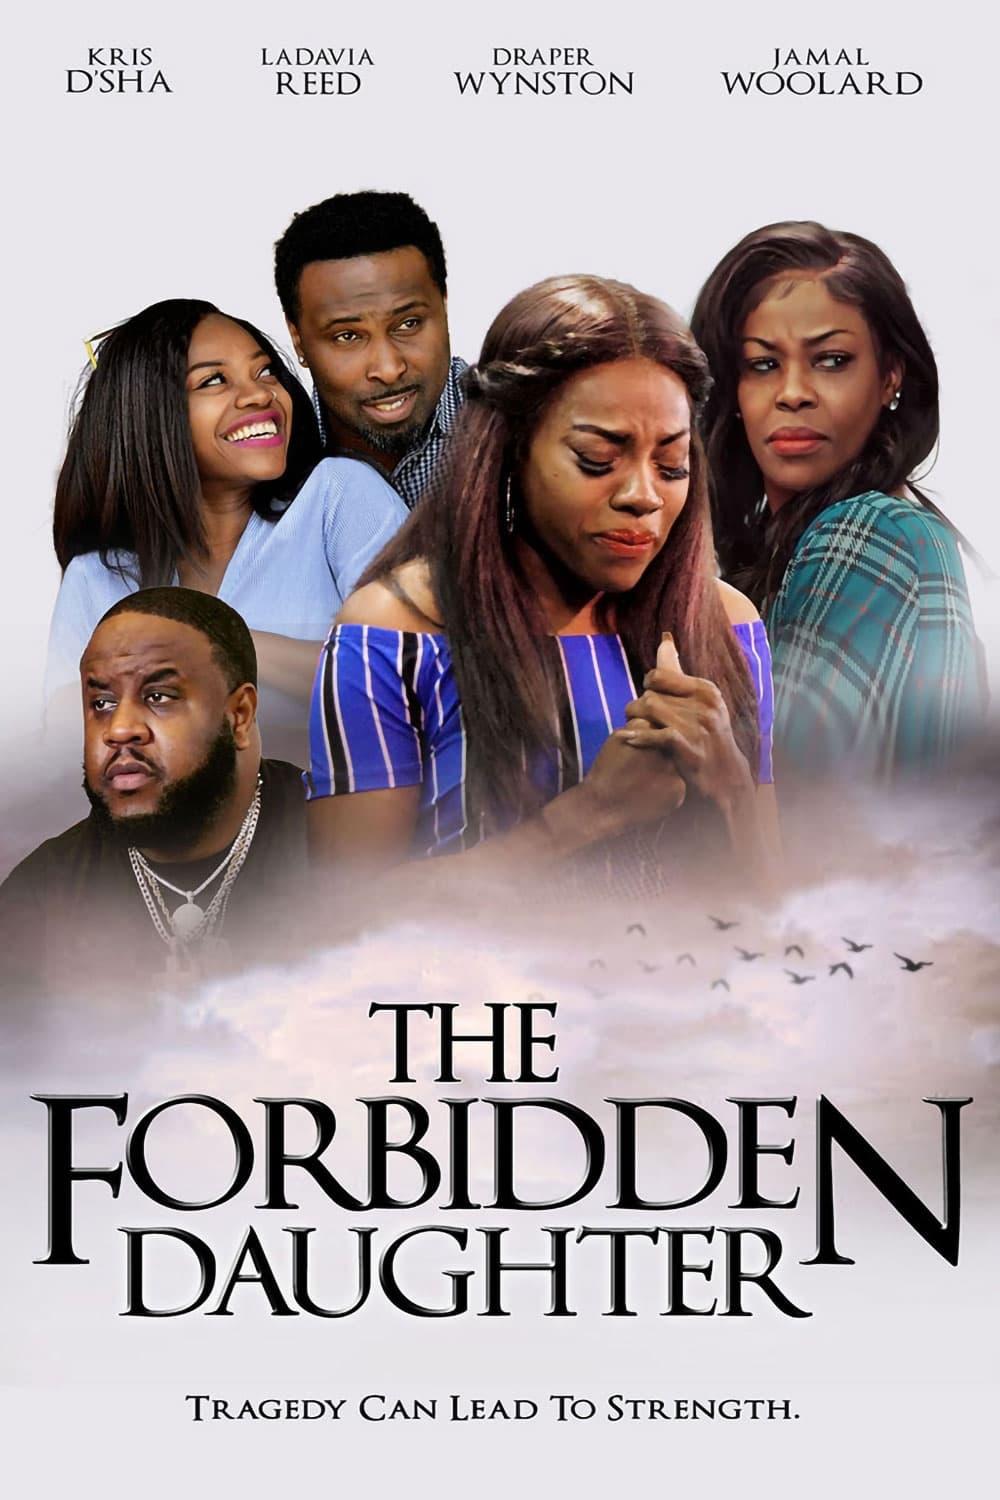 The Forbidden Daughter poster